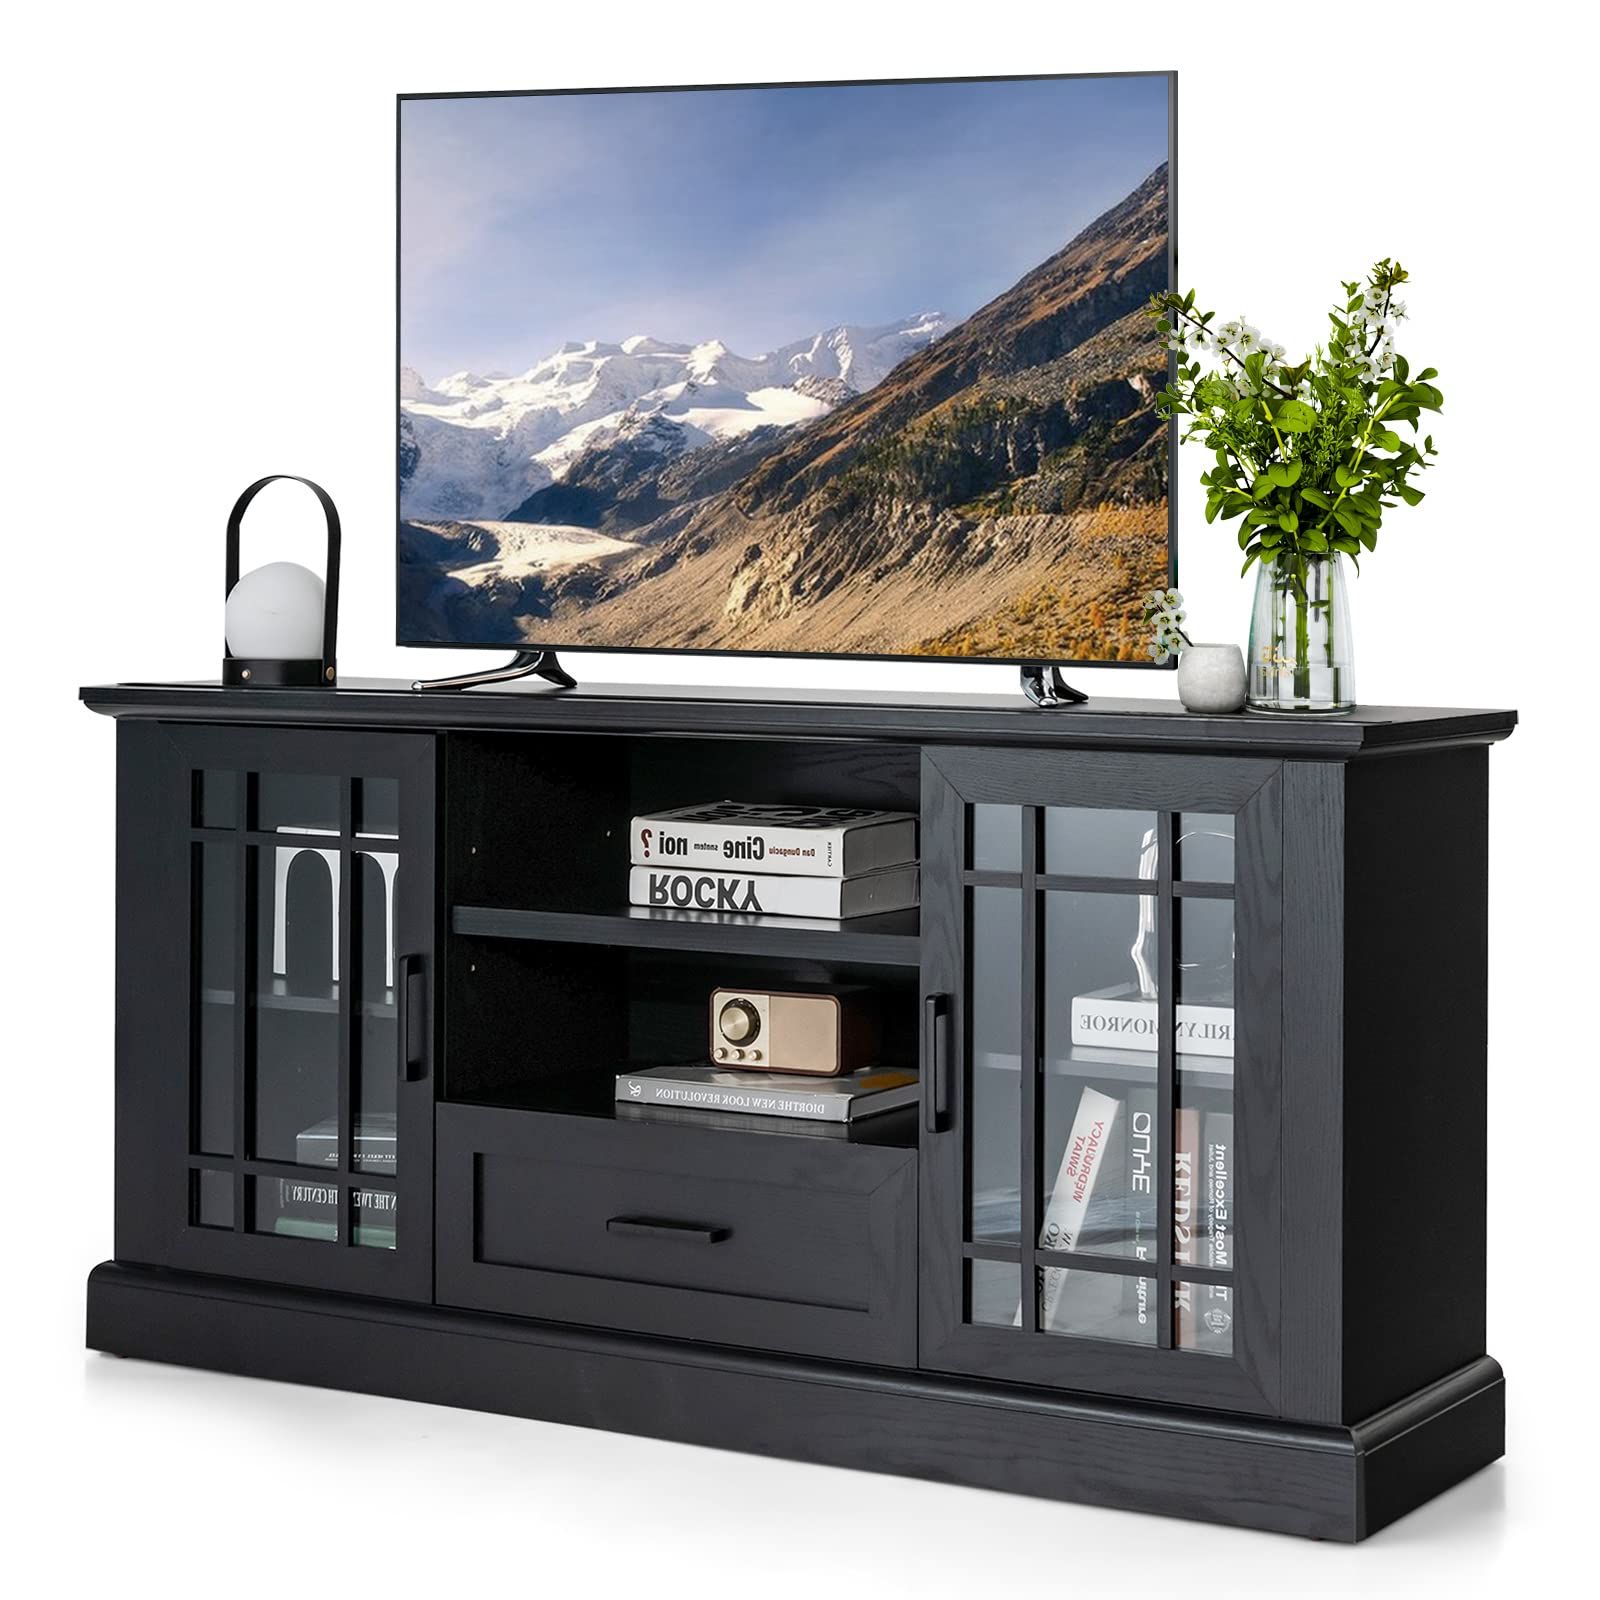 Farmhouse Tv Stands For 70 Inch Tv For Well Known Buy Tangkula Farmhouse Tv Stand For Tv Up To 70 Inch, Tall Media (View 5 of 15)